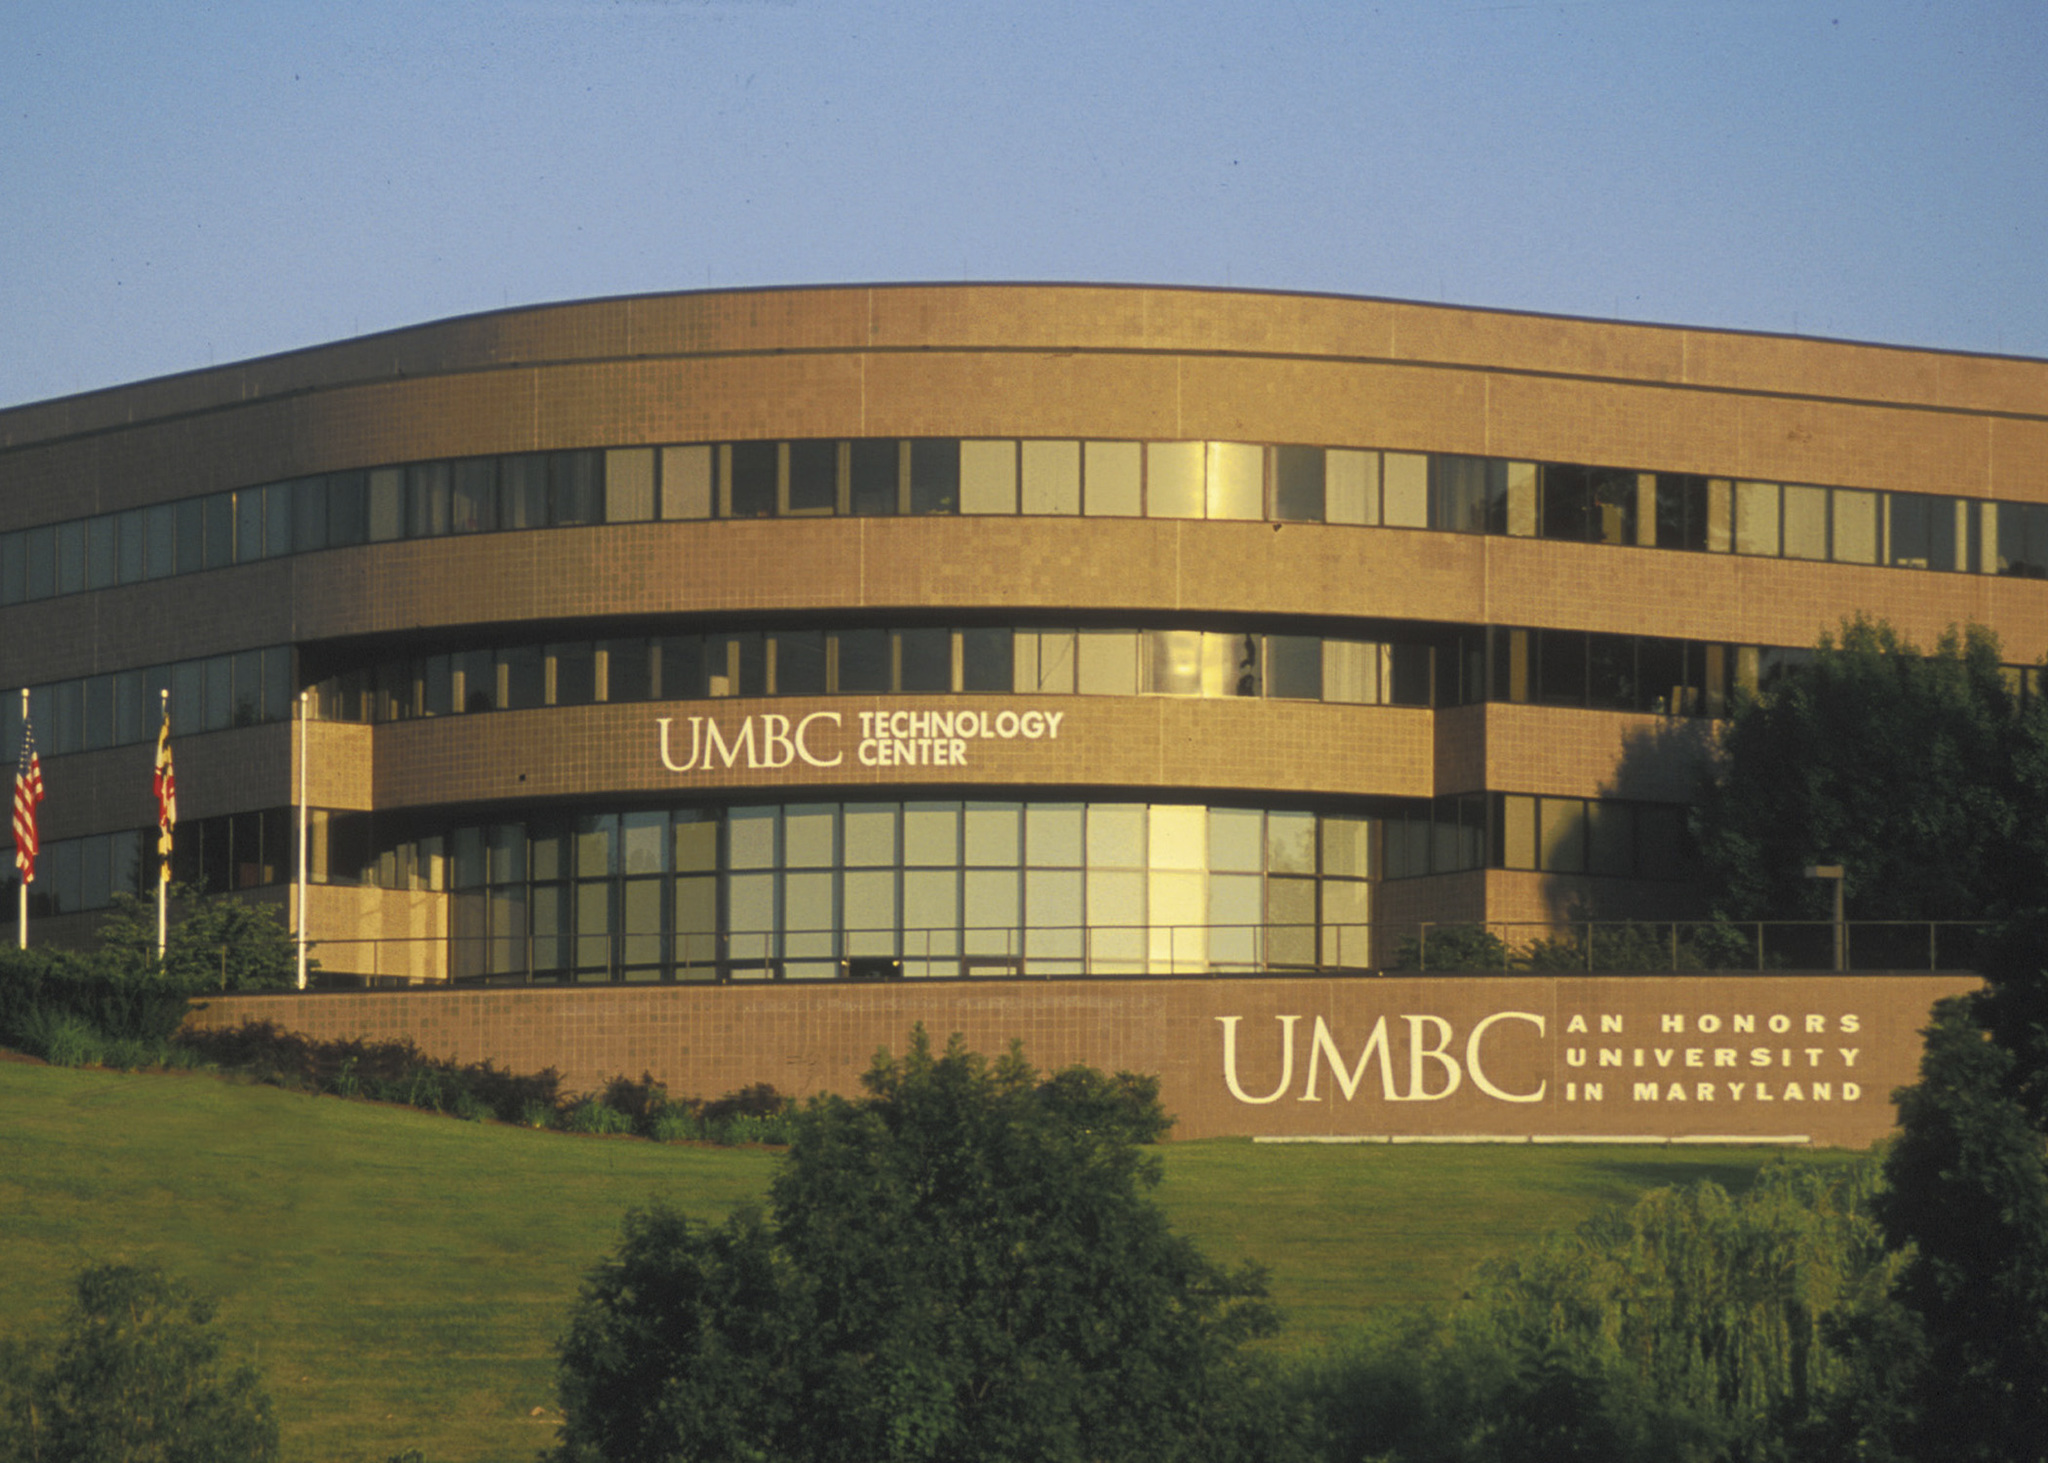 UMBC South Campus building where the trainings are conducted